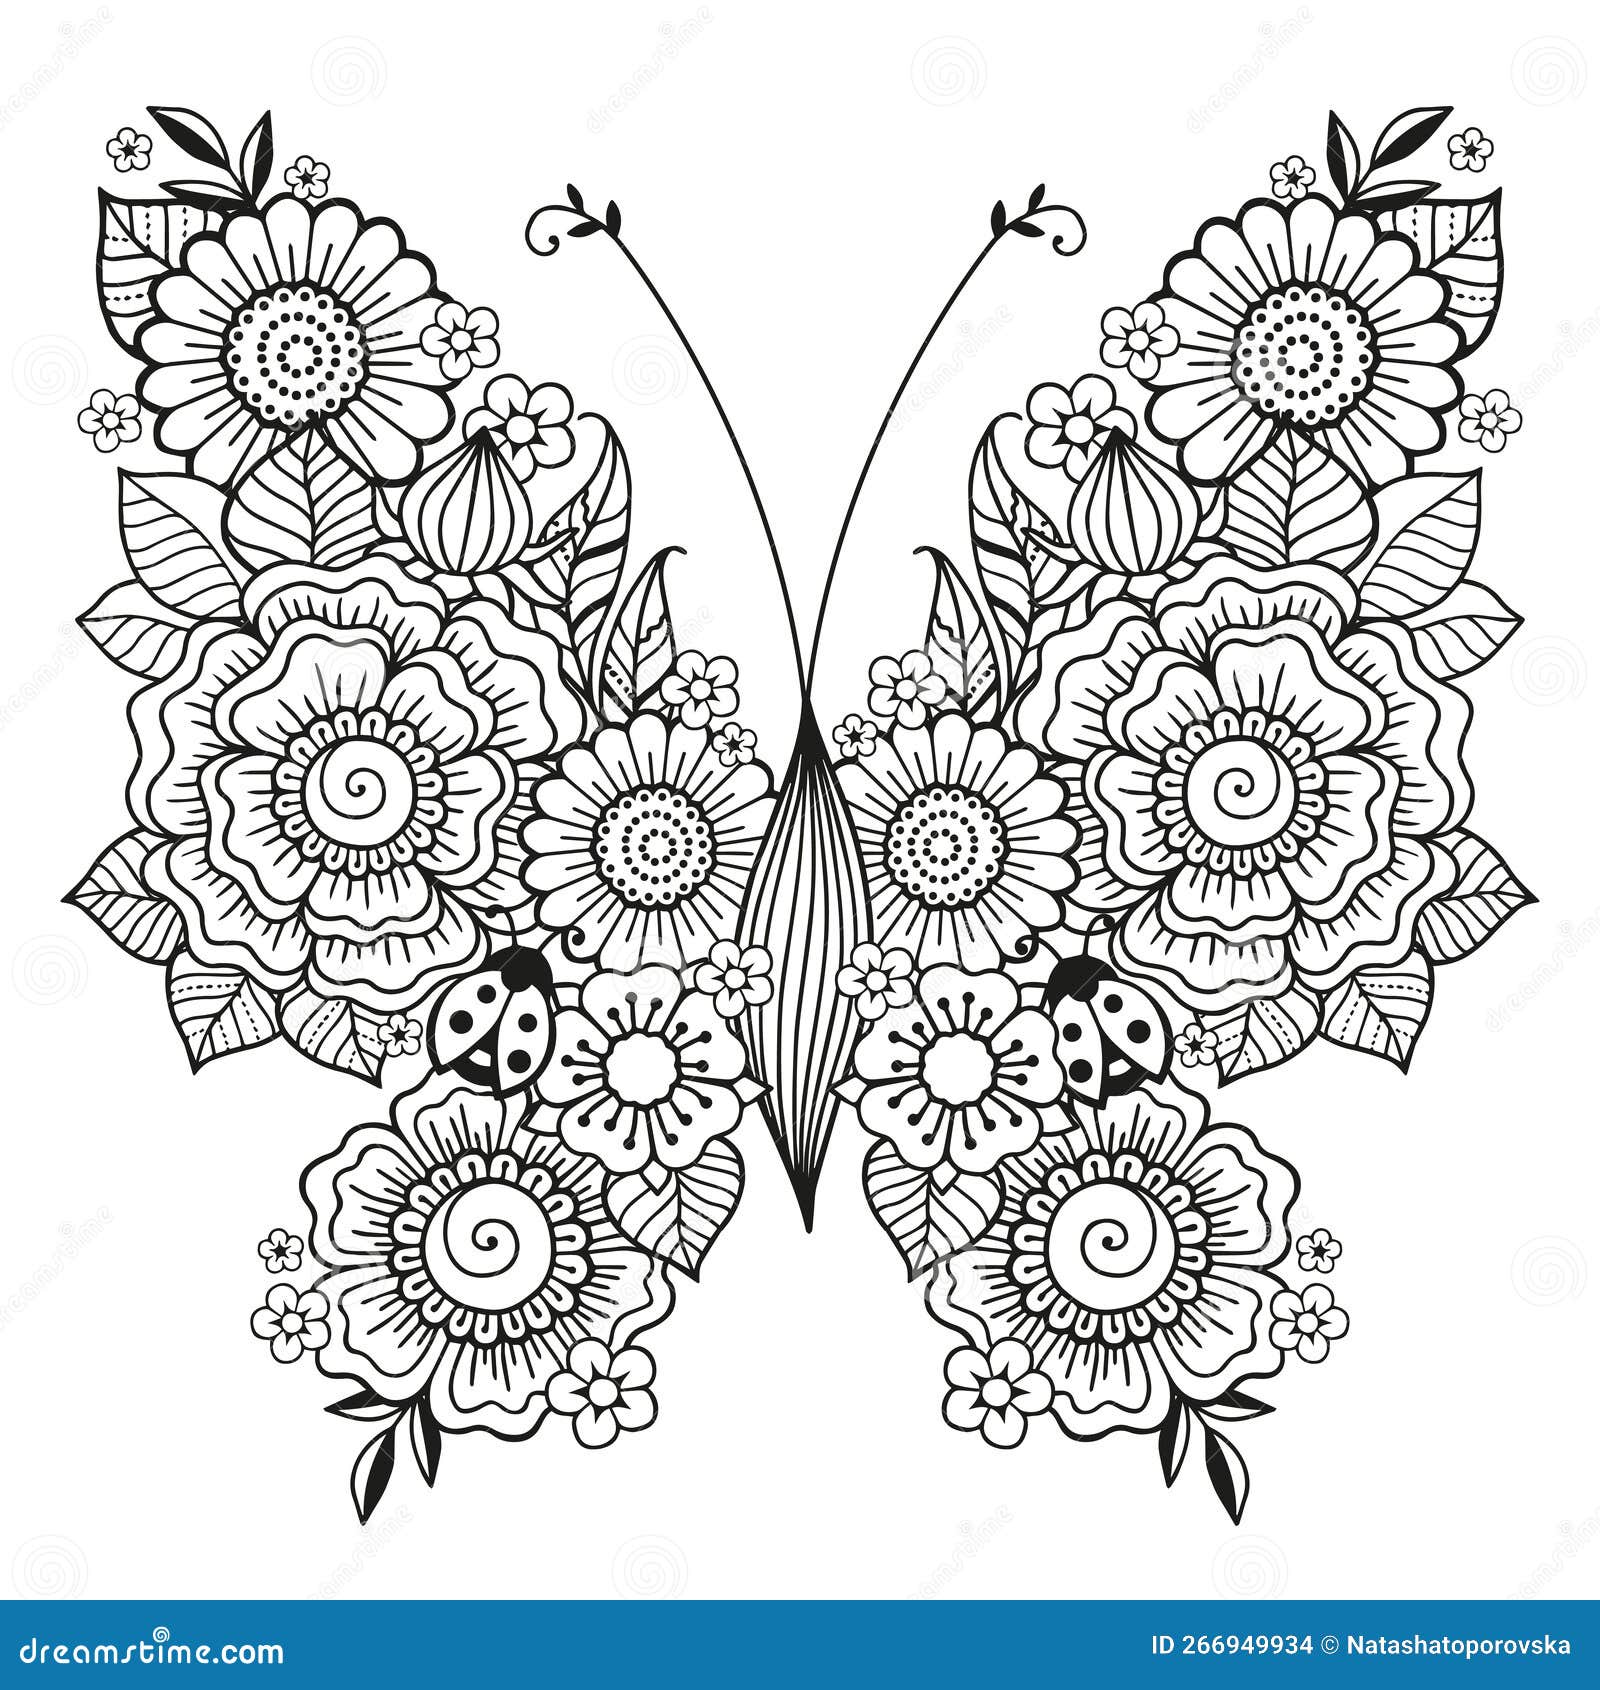 Vector Coloring Book Page for Adults. Black and White Illustration of a ...